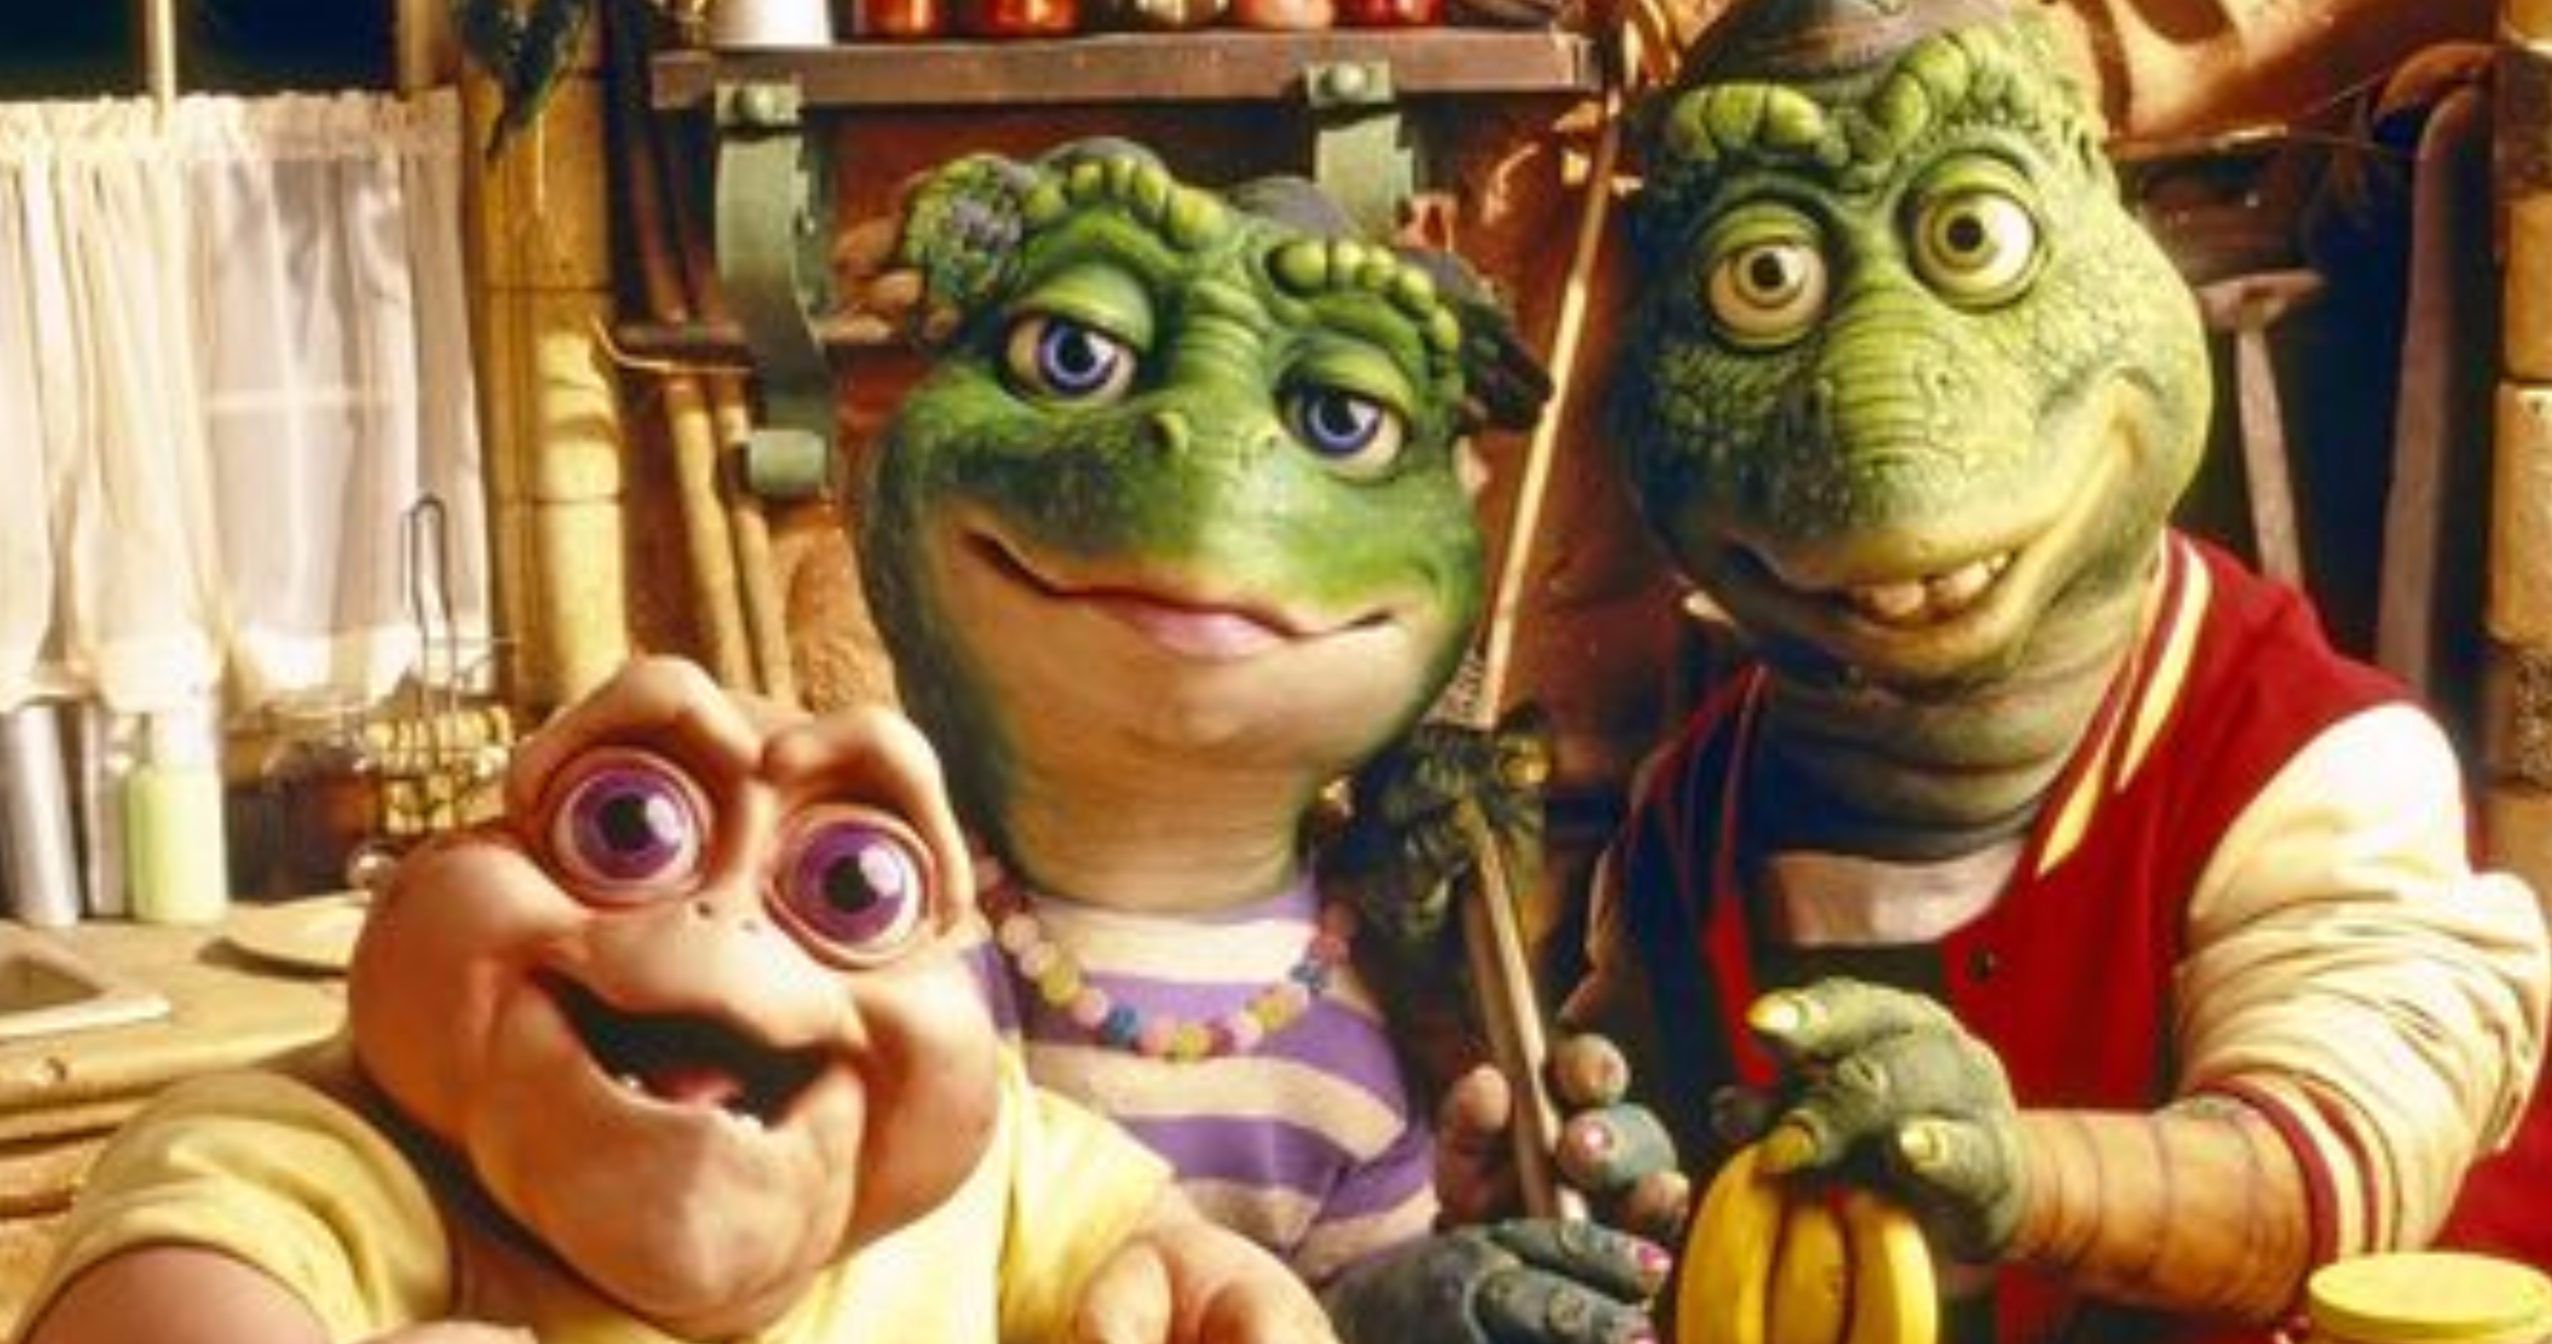 Dinosaurs TV Show Is Coming to Disney+ This Fall